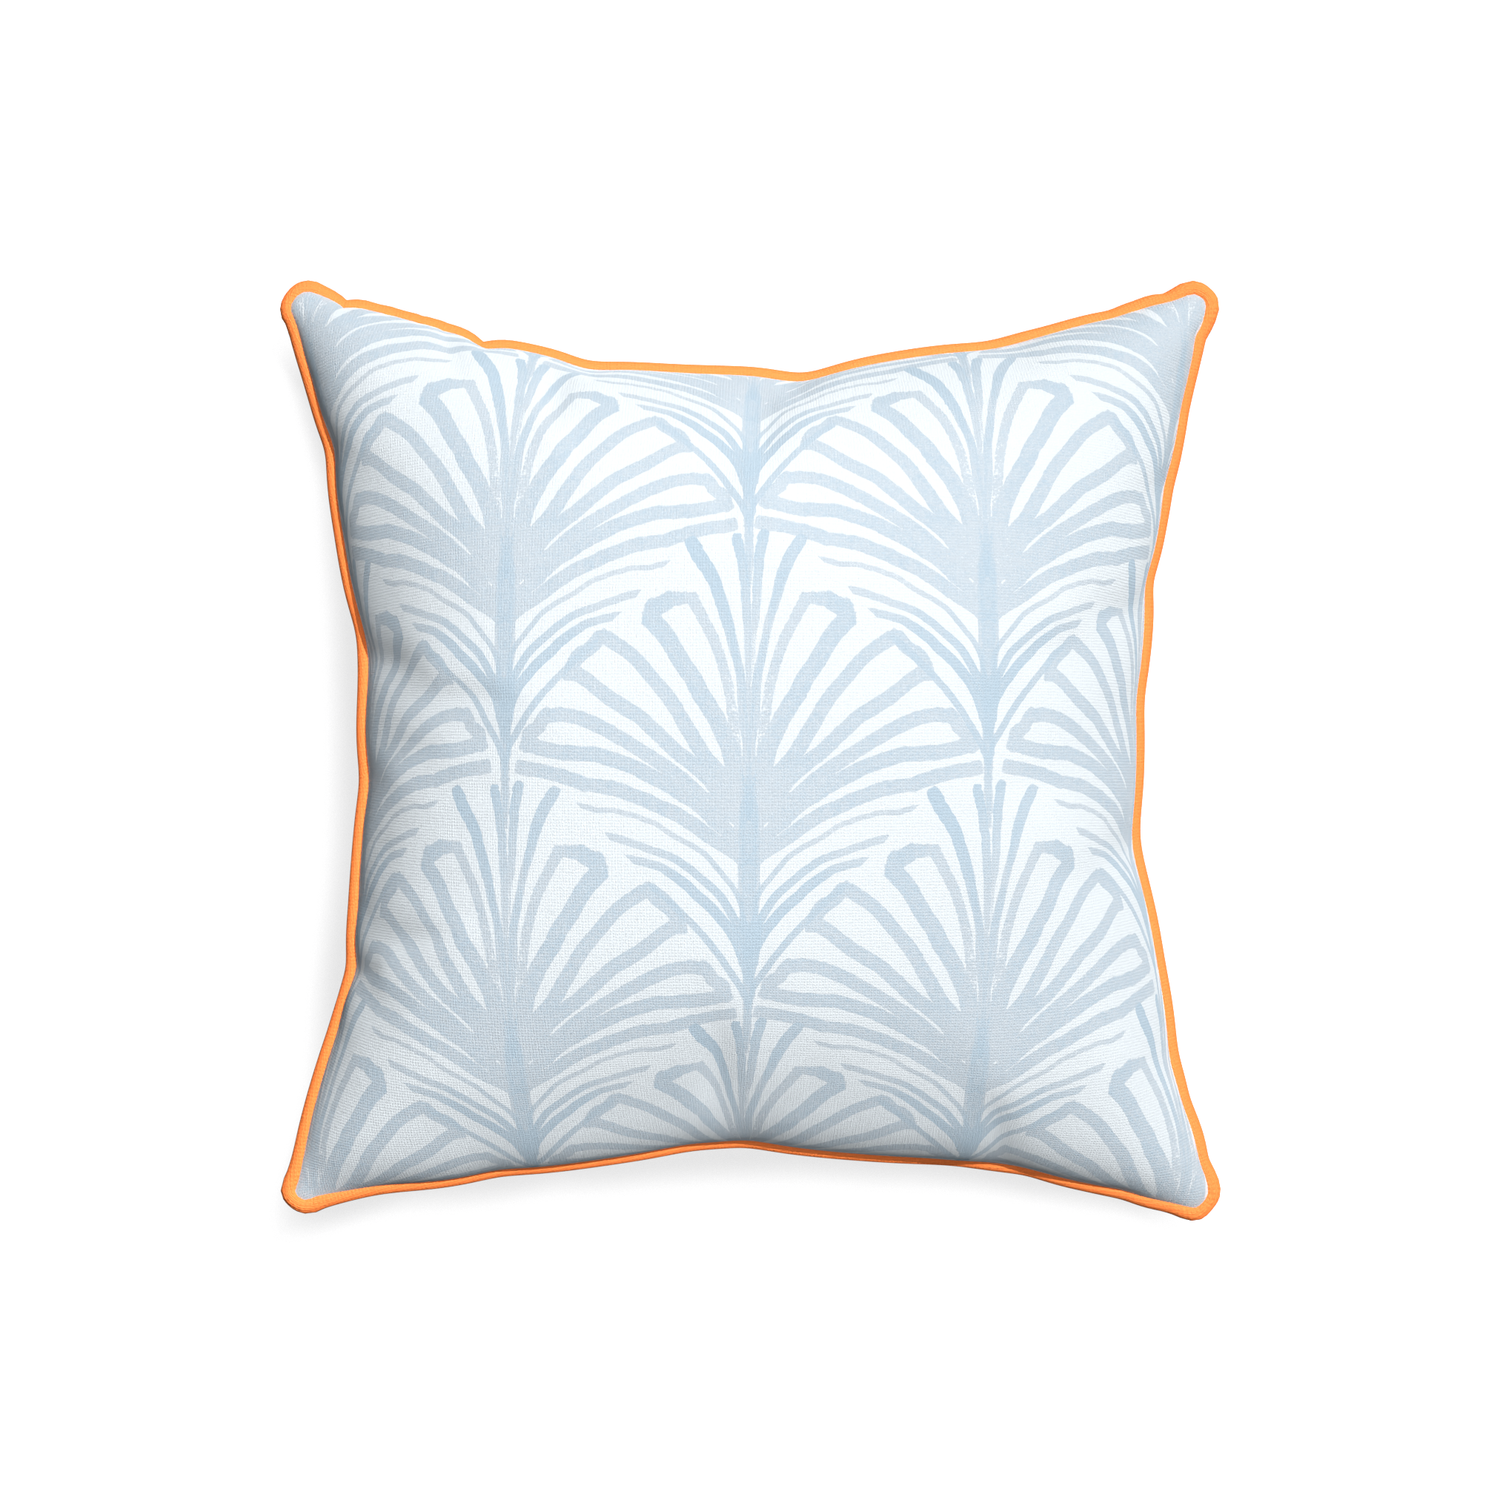 20-square suzy sky custom pillow with clementine piping on white background